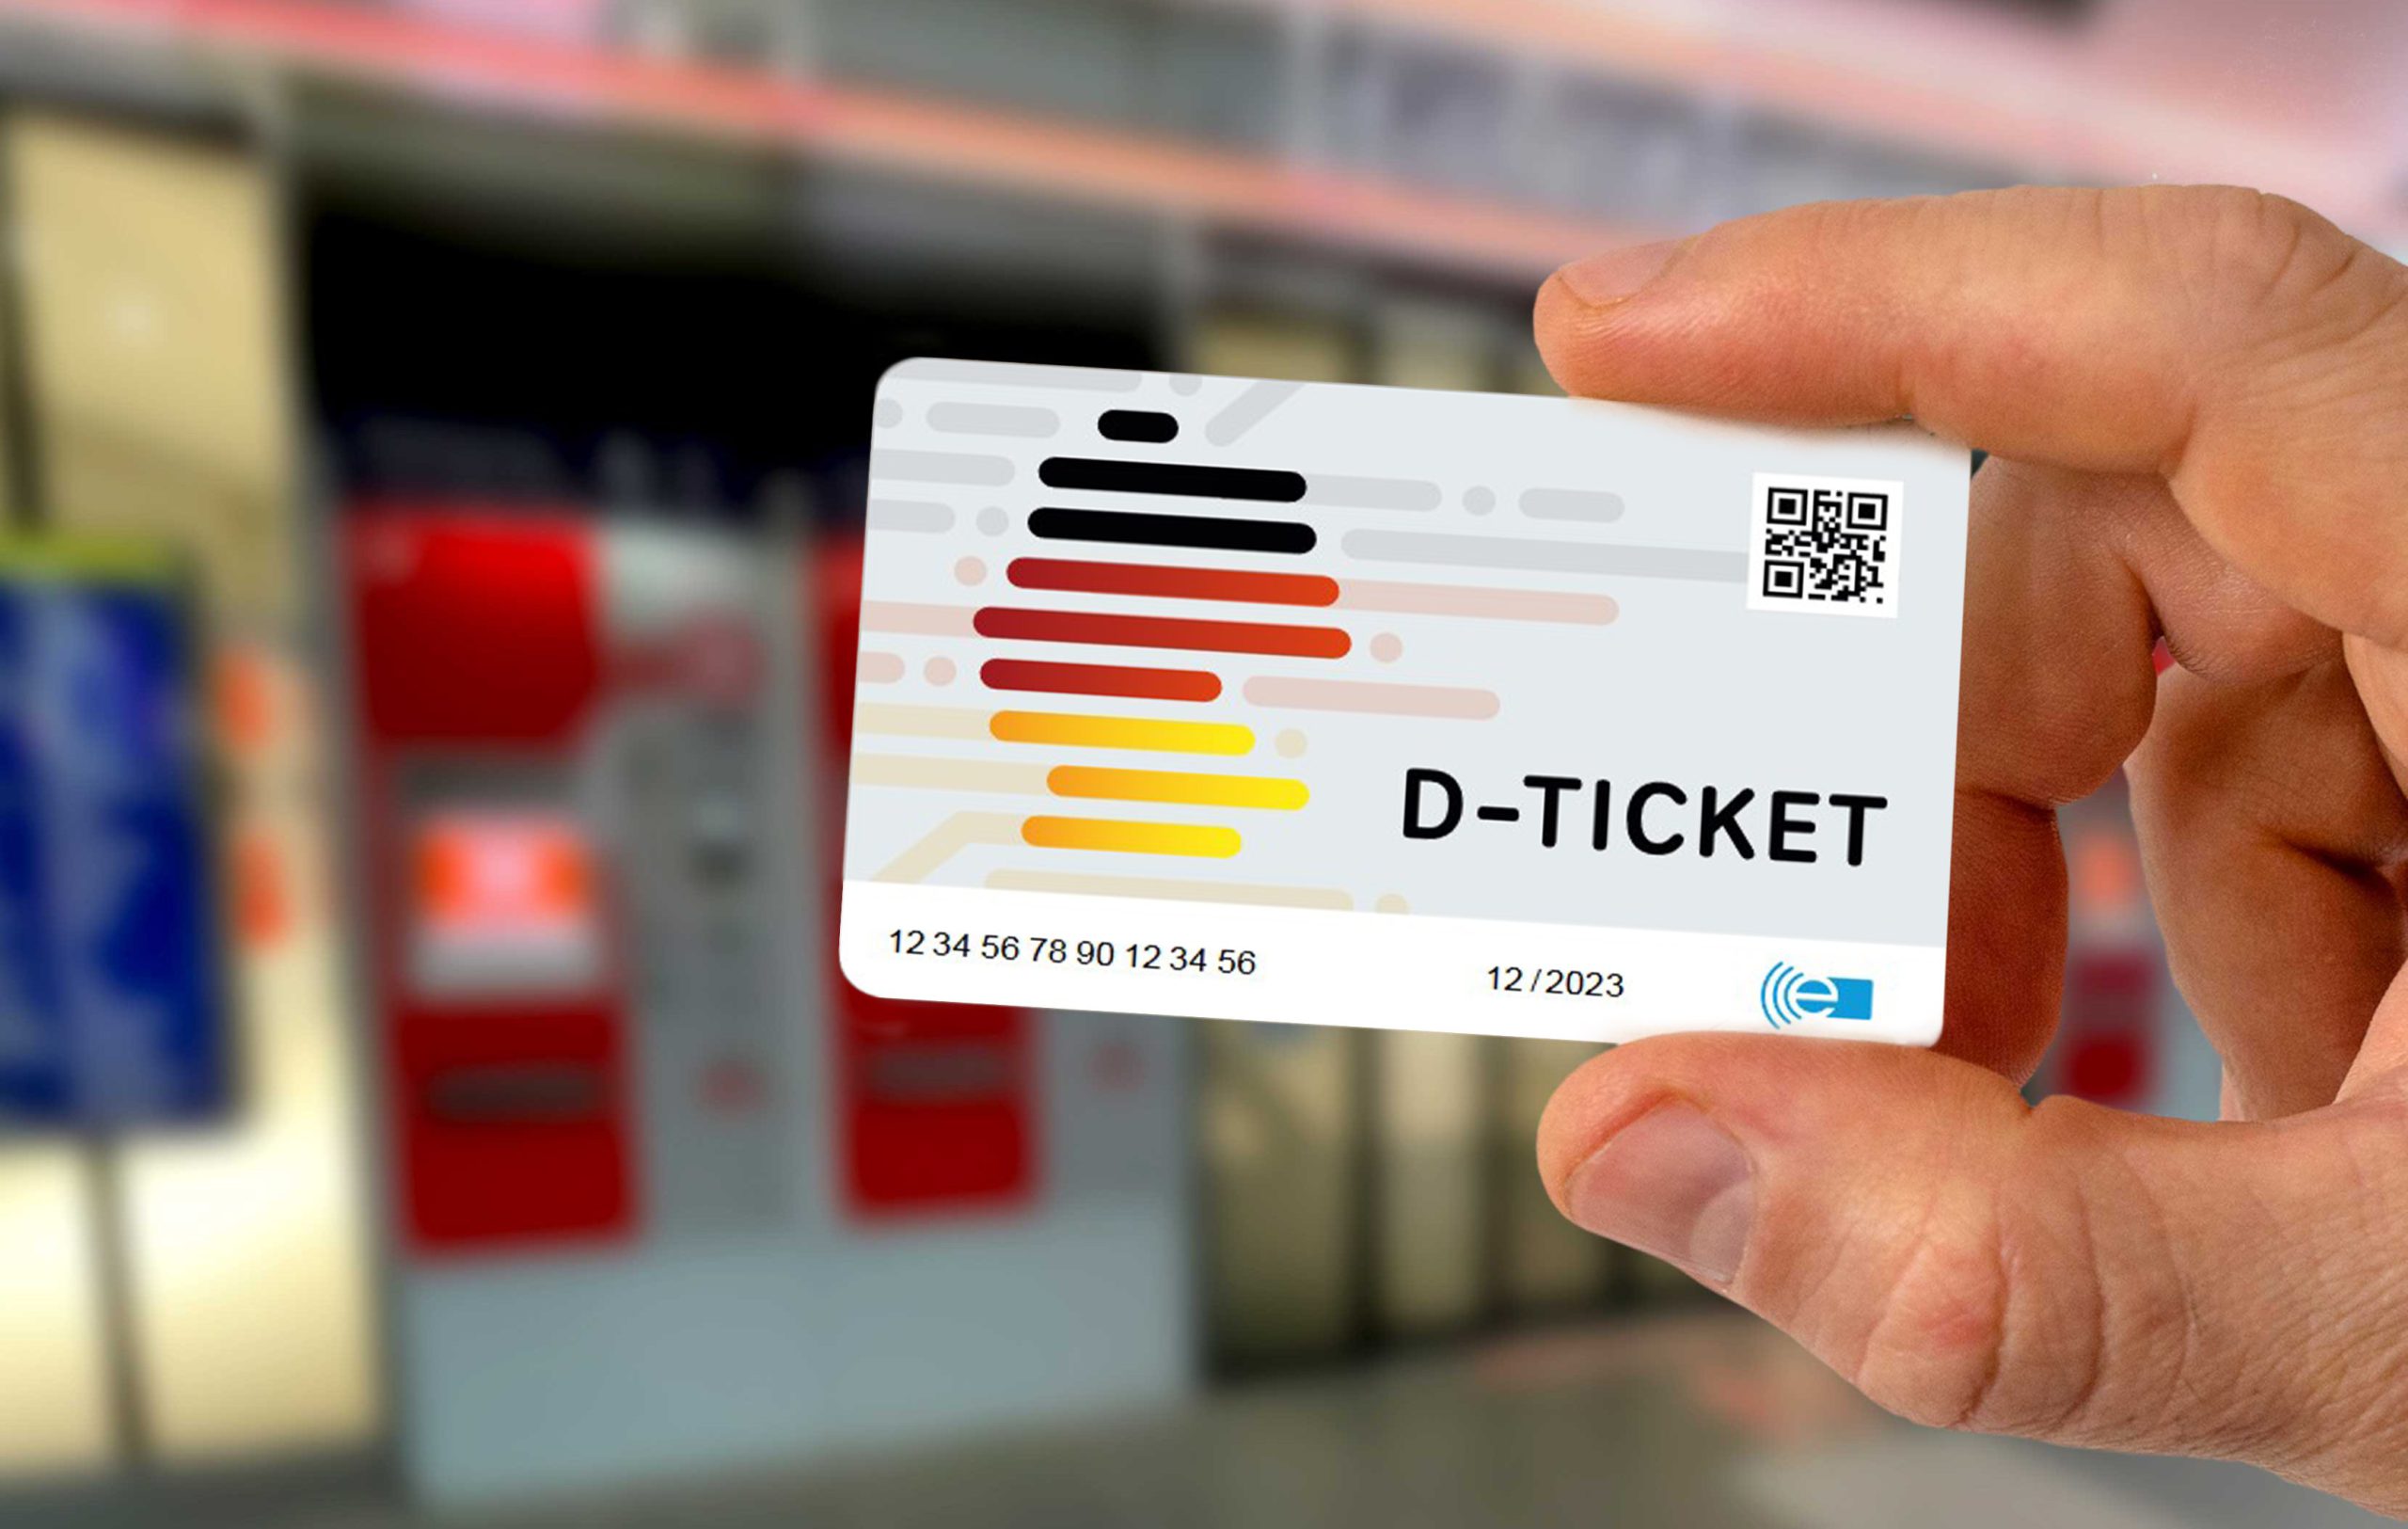 on-deutschland-ticket-results-and-impact-on-mobility-habits